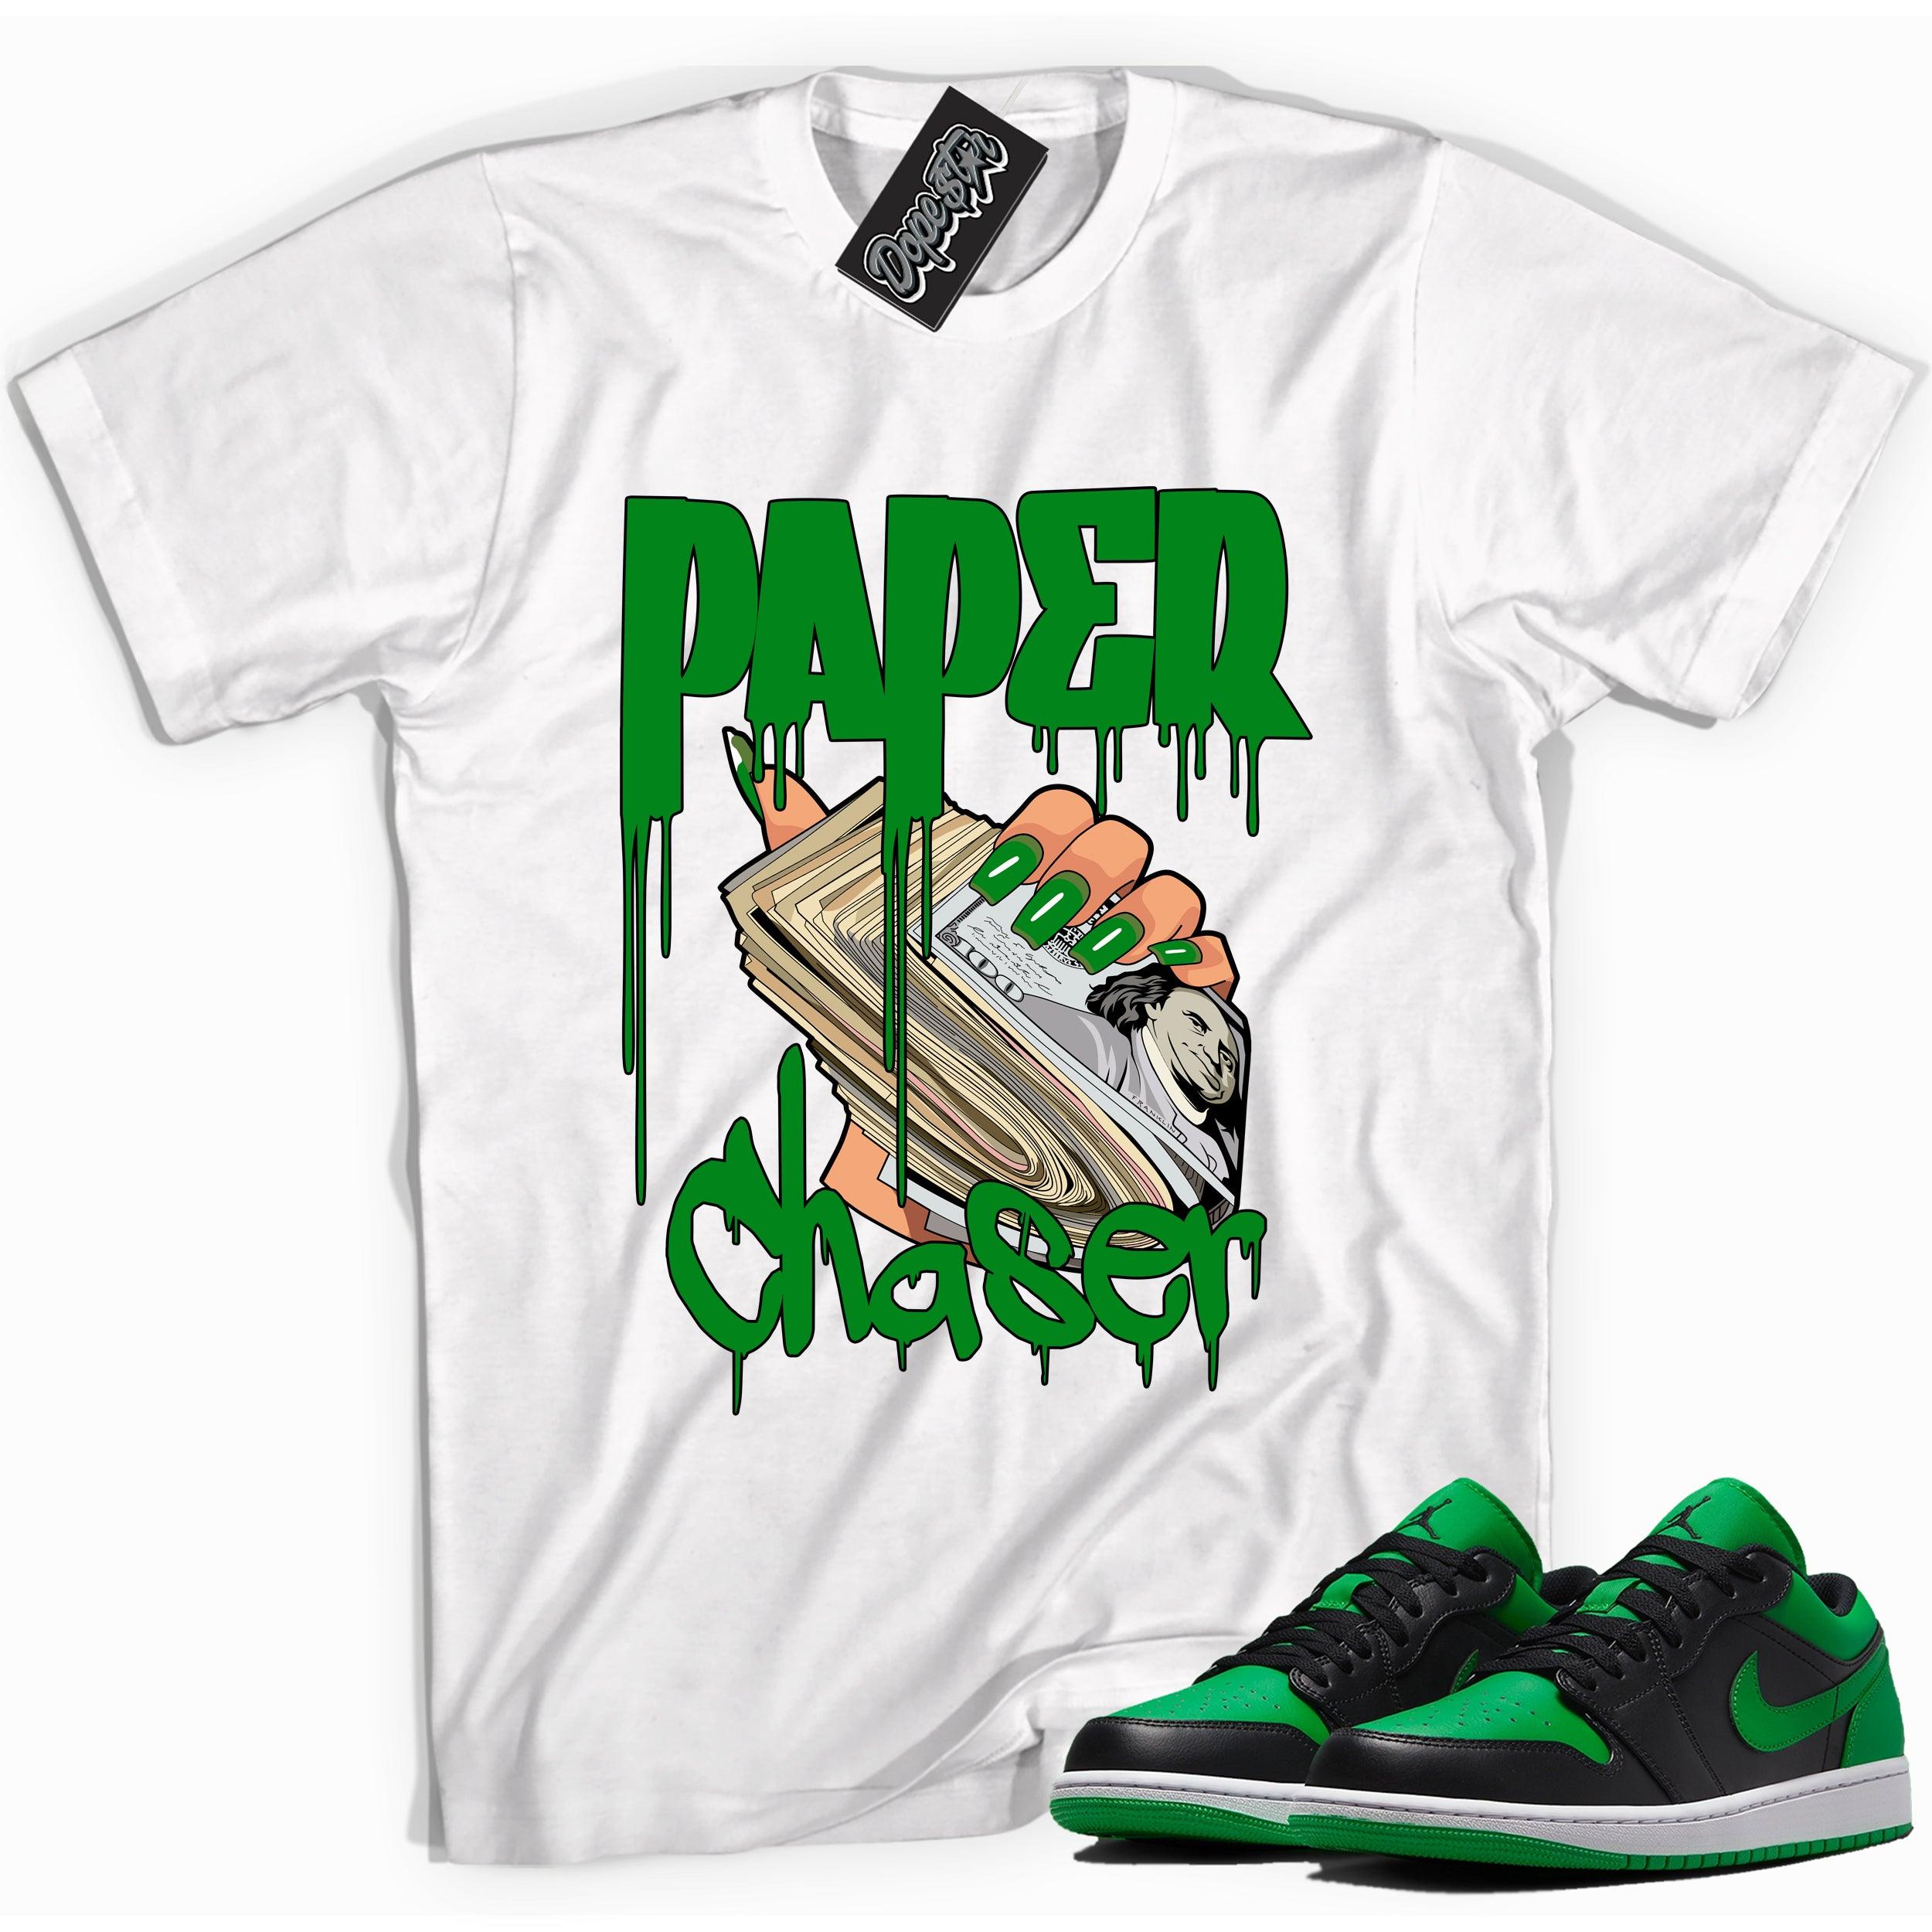 Cool white graphic tee with 'paper chaser' print, that perfectly matches Air Jordan 1 Low Lucky Green sneakers